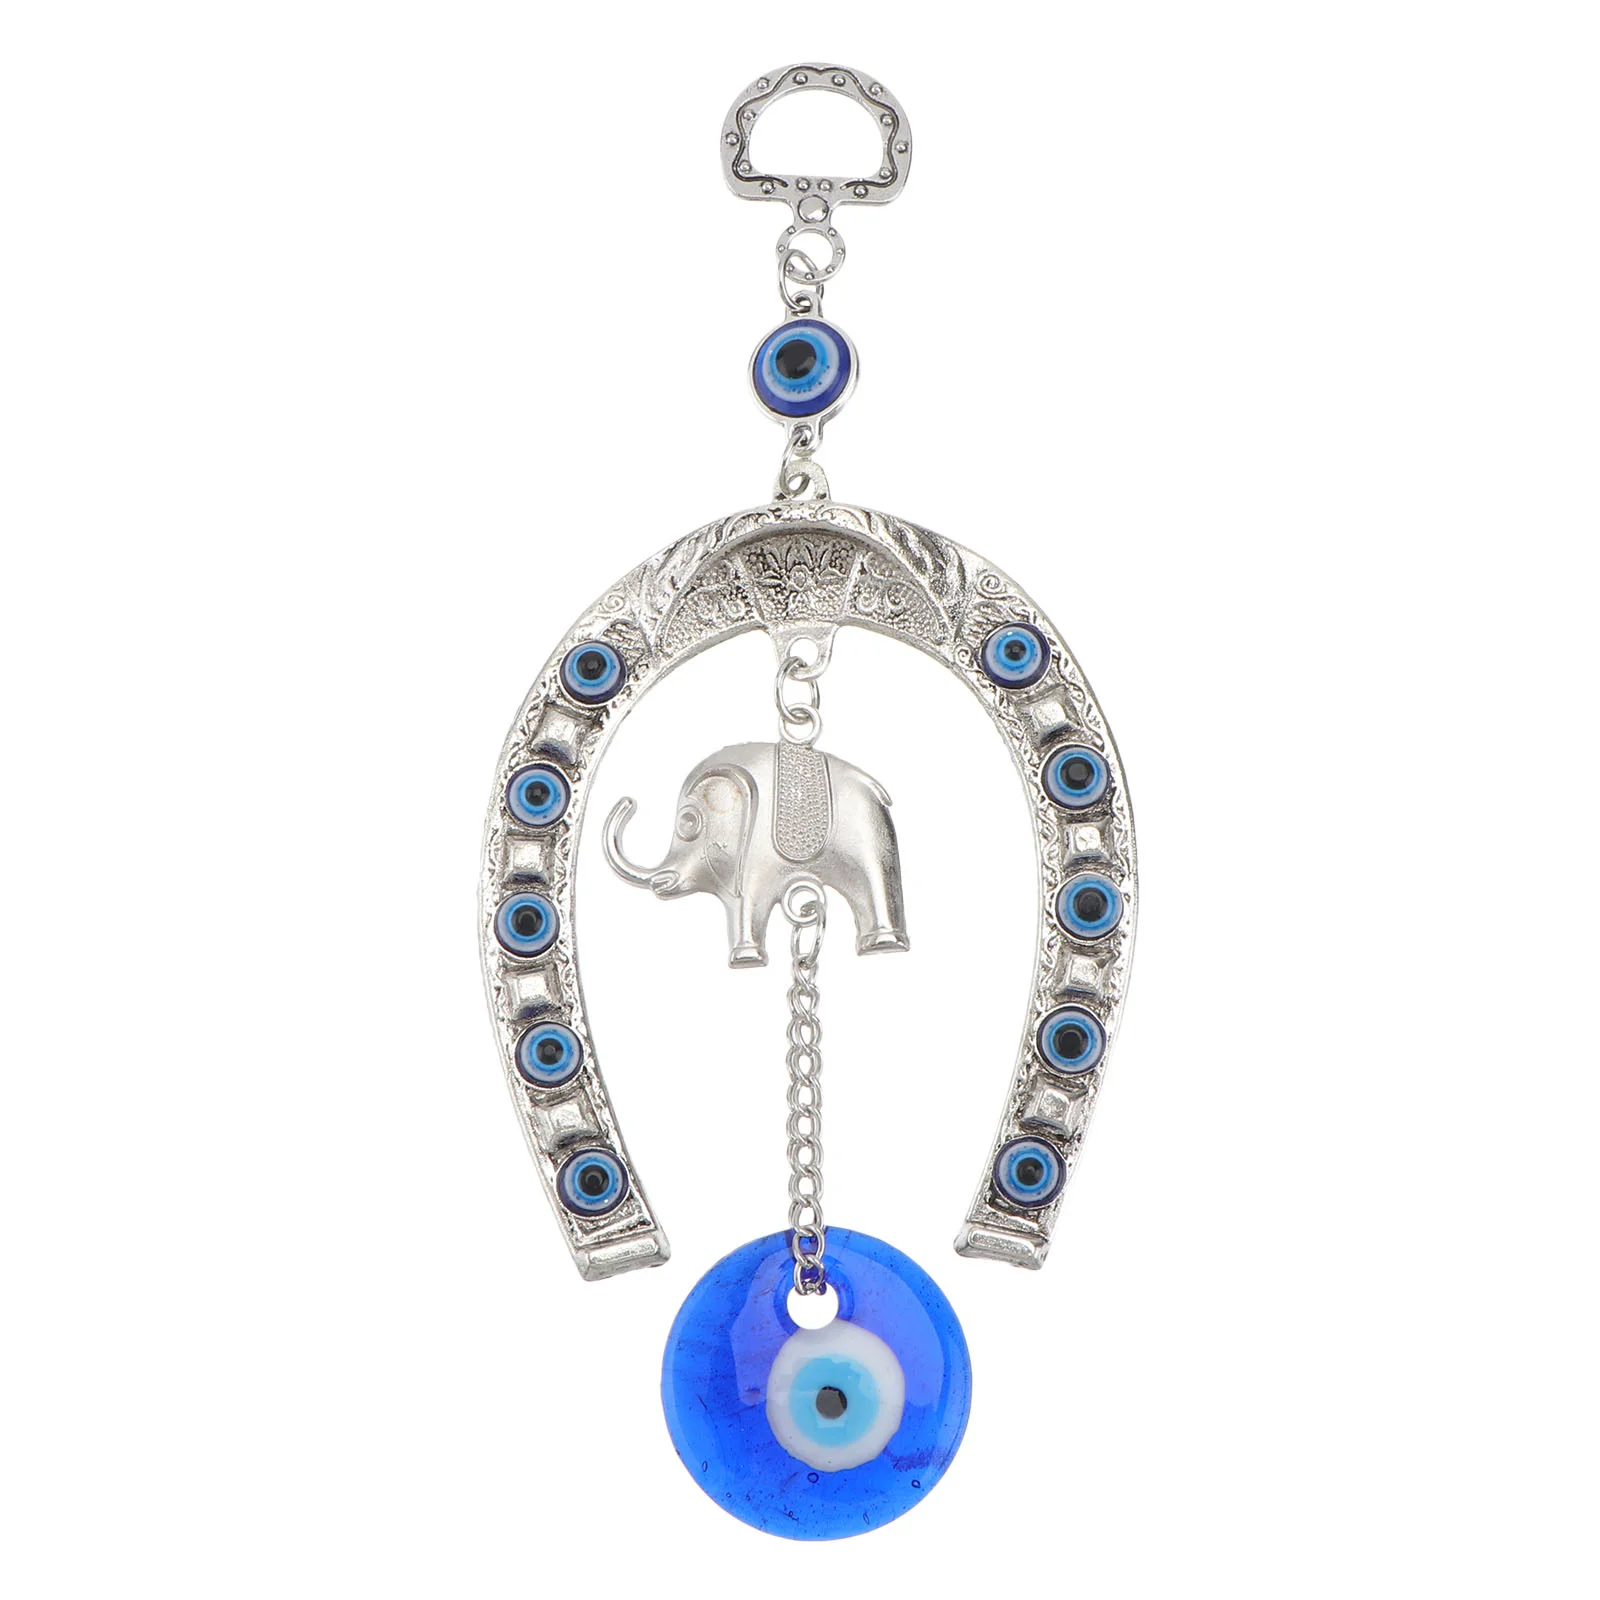 

Home Decoration Evil Eye Protection Turkish Blue House Ornaments Hamsa Beads Keychain Lucky Wall Pendant Blessing Charm Glass